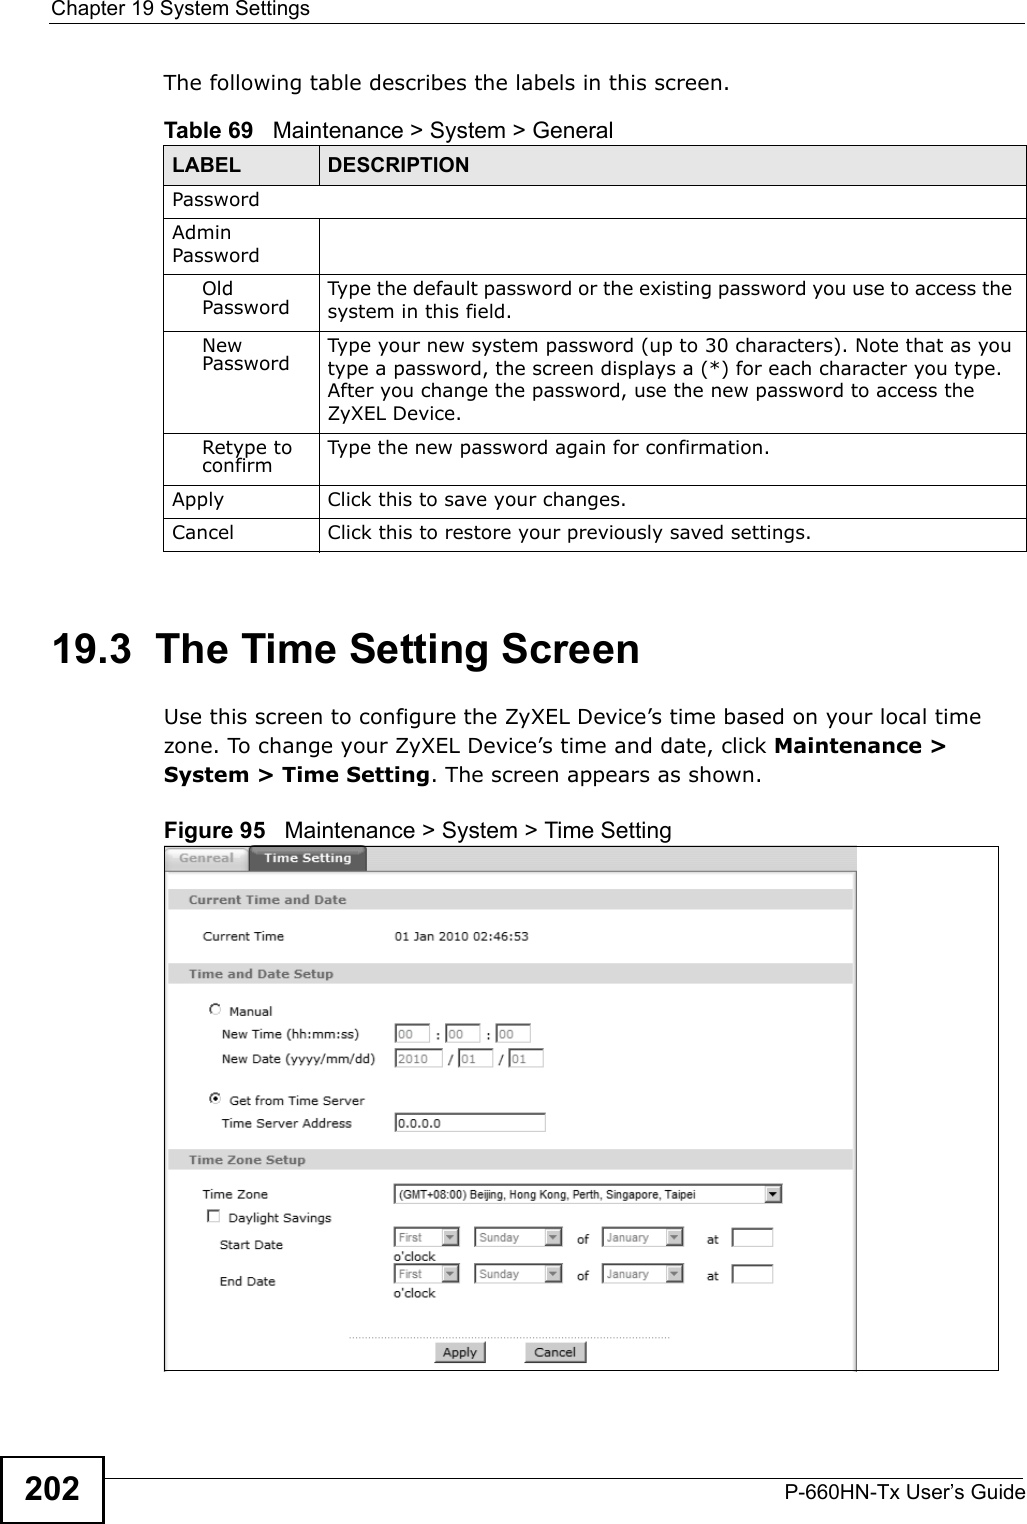 Chapter 19 System SettingsP-660HN-Tx User’s Guide202The following table describes the labels in this screen. 19.3  The Time Setting Screen Use this screen to configure the ZyXEL Device’s time based on your local time zone. To change your ZyXEL Device’s time and date, click Maintenance &gt; System &gt; Time Setting. The screen appears as shown.Figure 95   Maintenance &gt; System &gt; Time SettingTable 69   Maintenance &gt; System &gt; GeneralLABEL DESCRIPTIONPasswordAdmin PasswordOld Password Type the default password or the existing password you use to access the system in this field.New Password Type your new system password (up to 30 characters). Note that as you type a password, the screen displays a (*) for each character you type. After you change the password, use the new password to access the ZyXEL Device.Retype to confirm Type the new password again for confirmation.Apply Click this to save your changes.Cancel Click this to restore your previously saved settings.